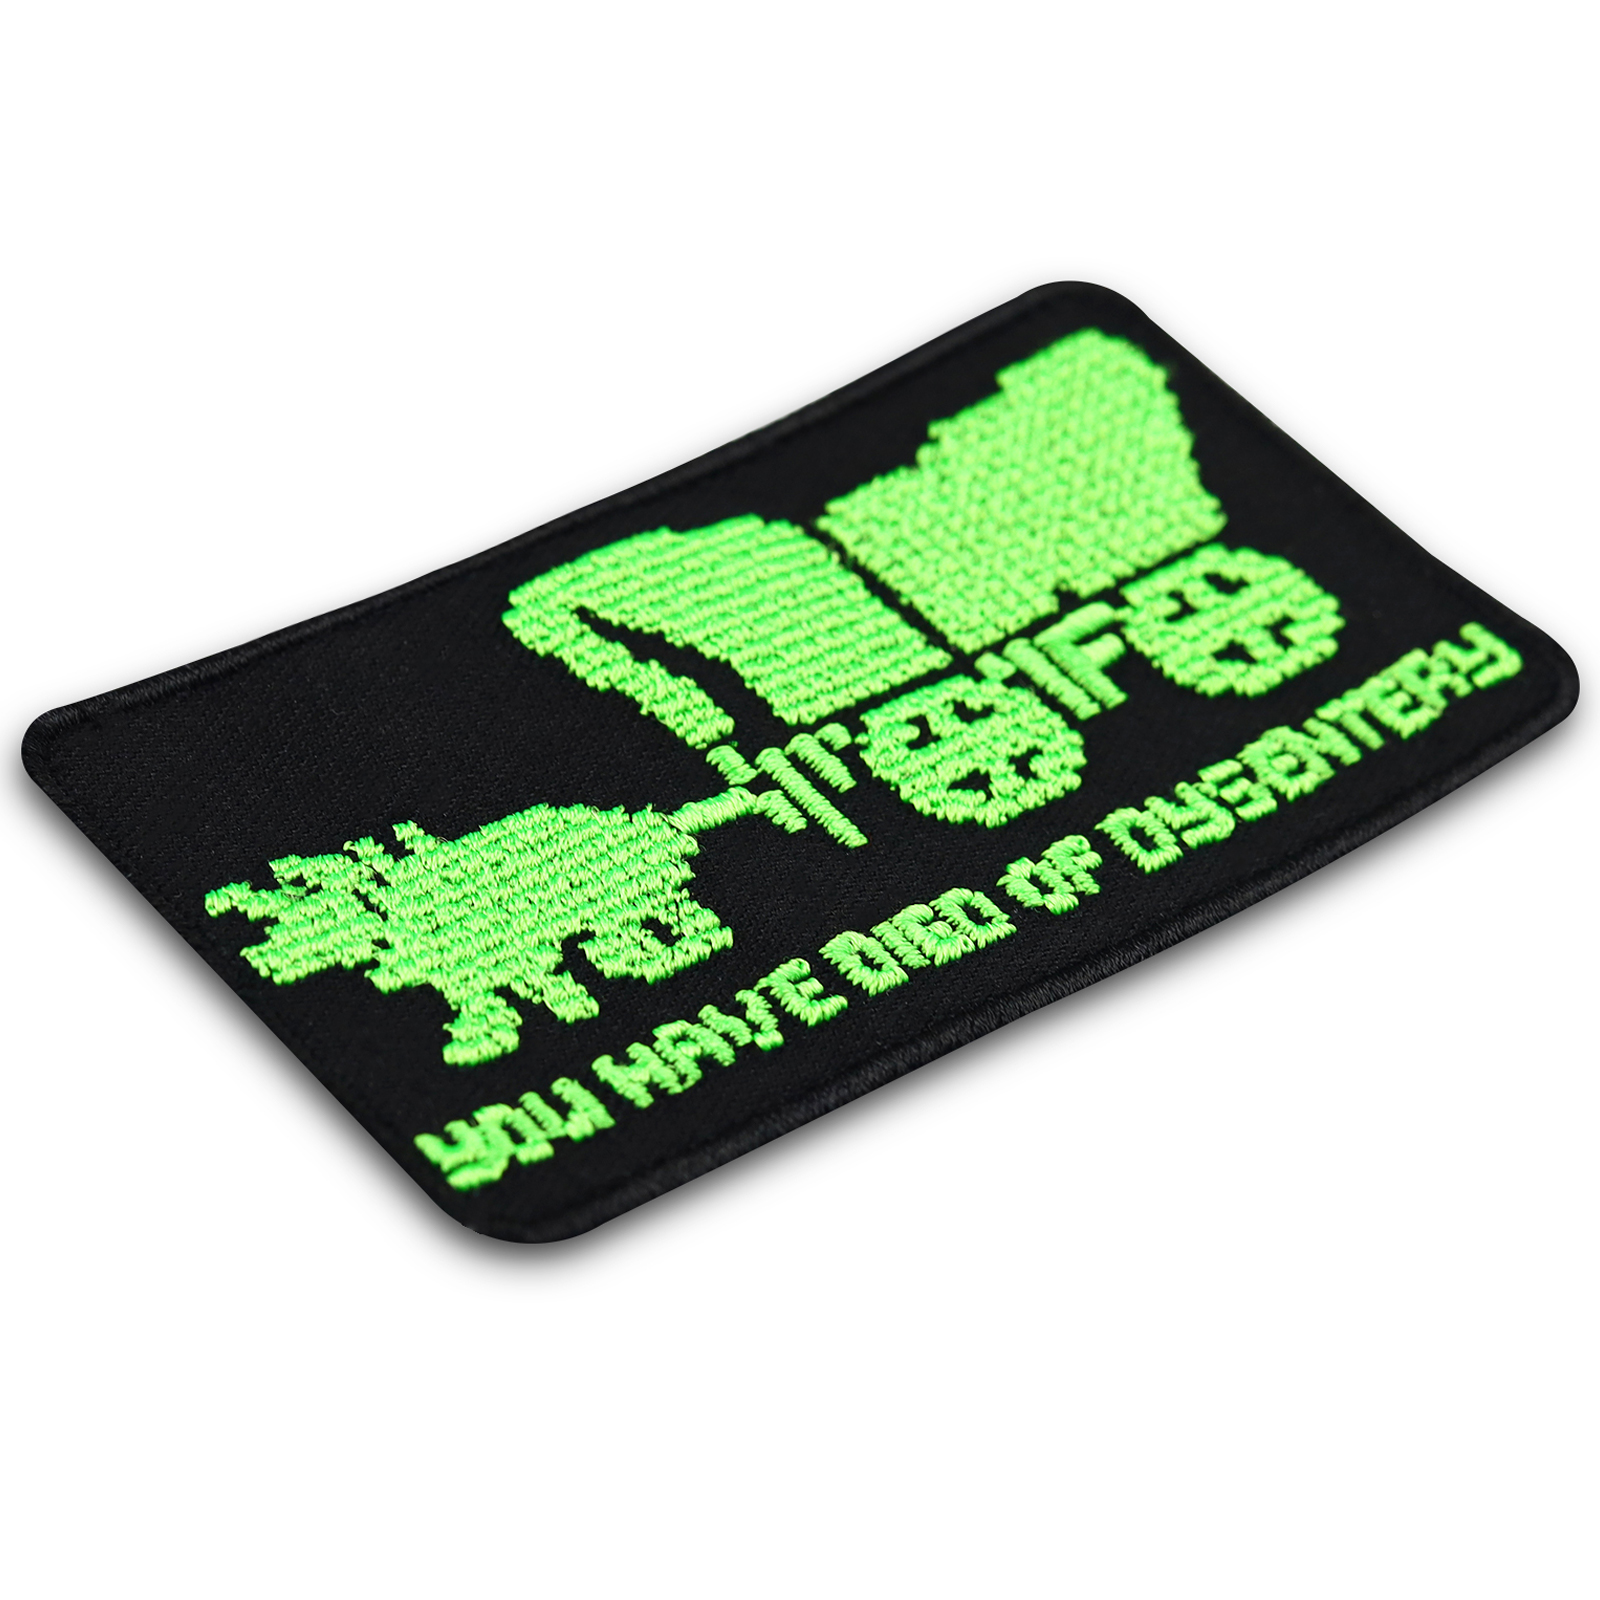 You have died of dysentery - Patch